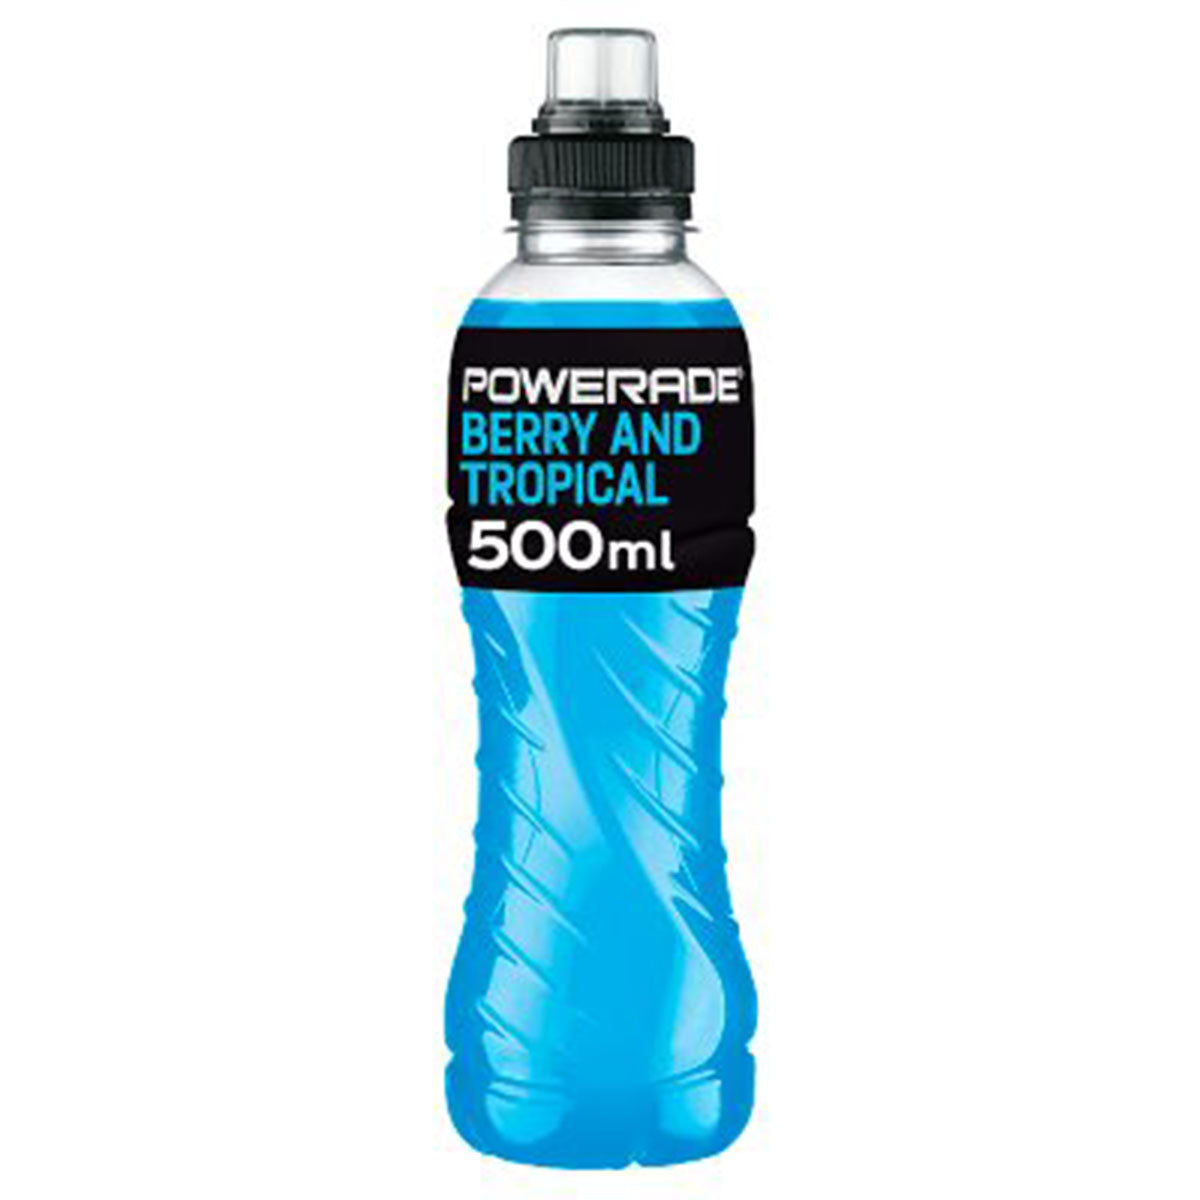 Powerade - Berry and Tropical Sports Drink - 500ml - Continental Food Store